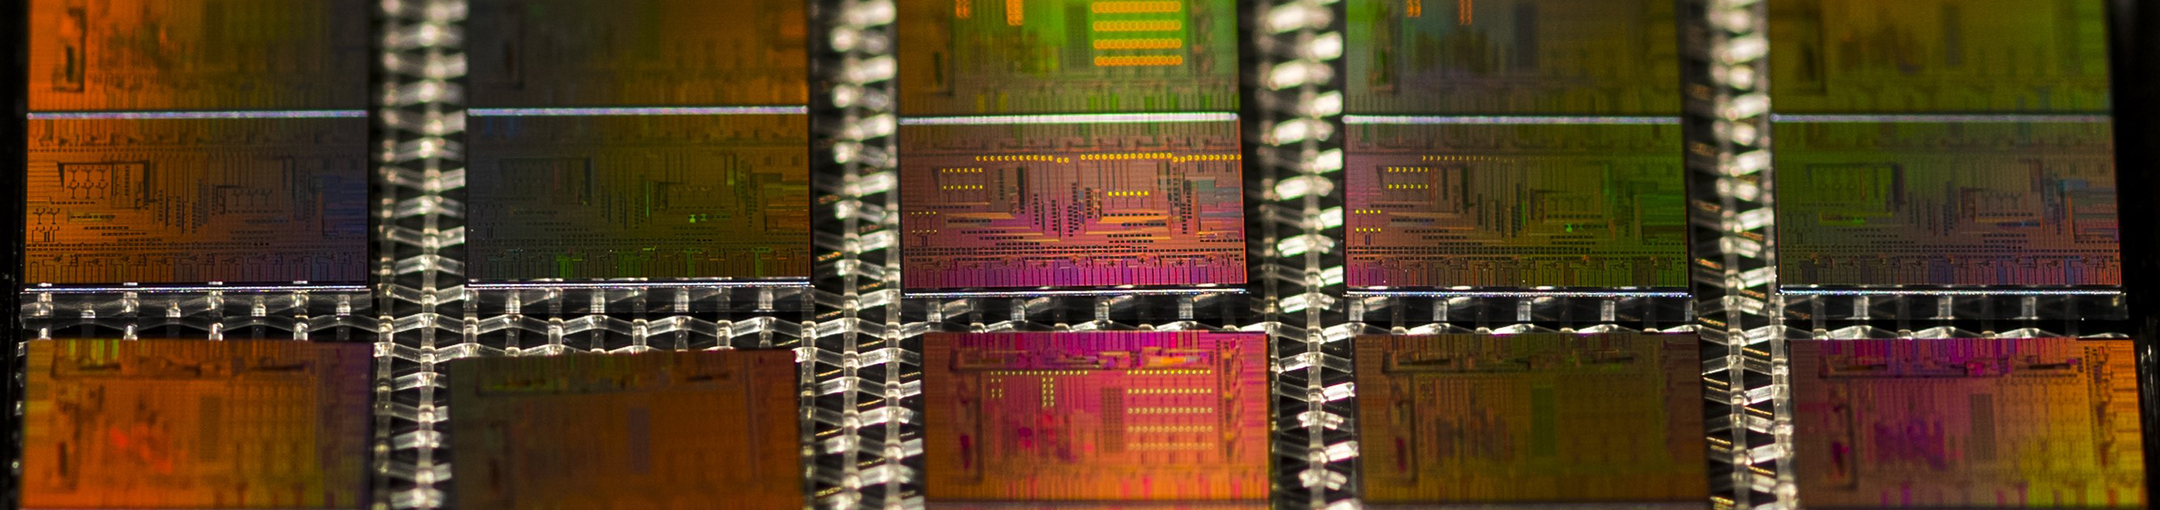 image of multiple computer chips placed in rows